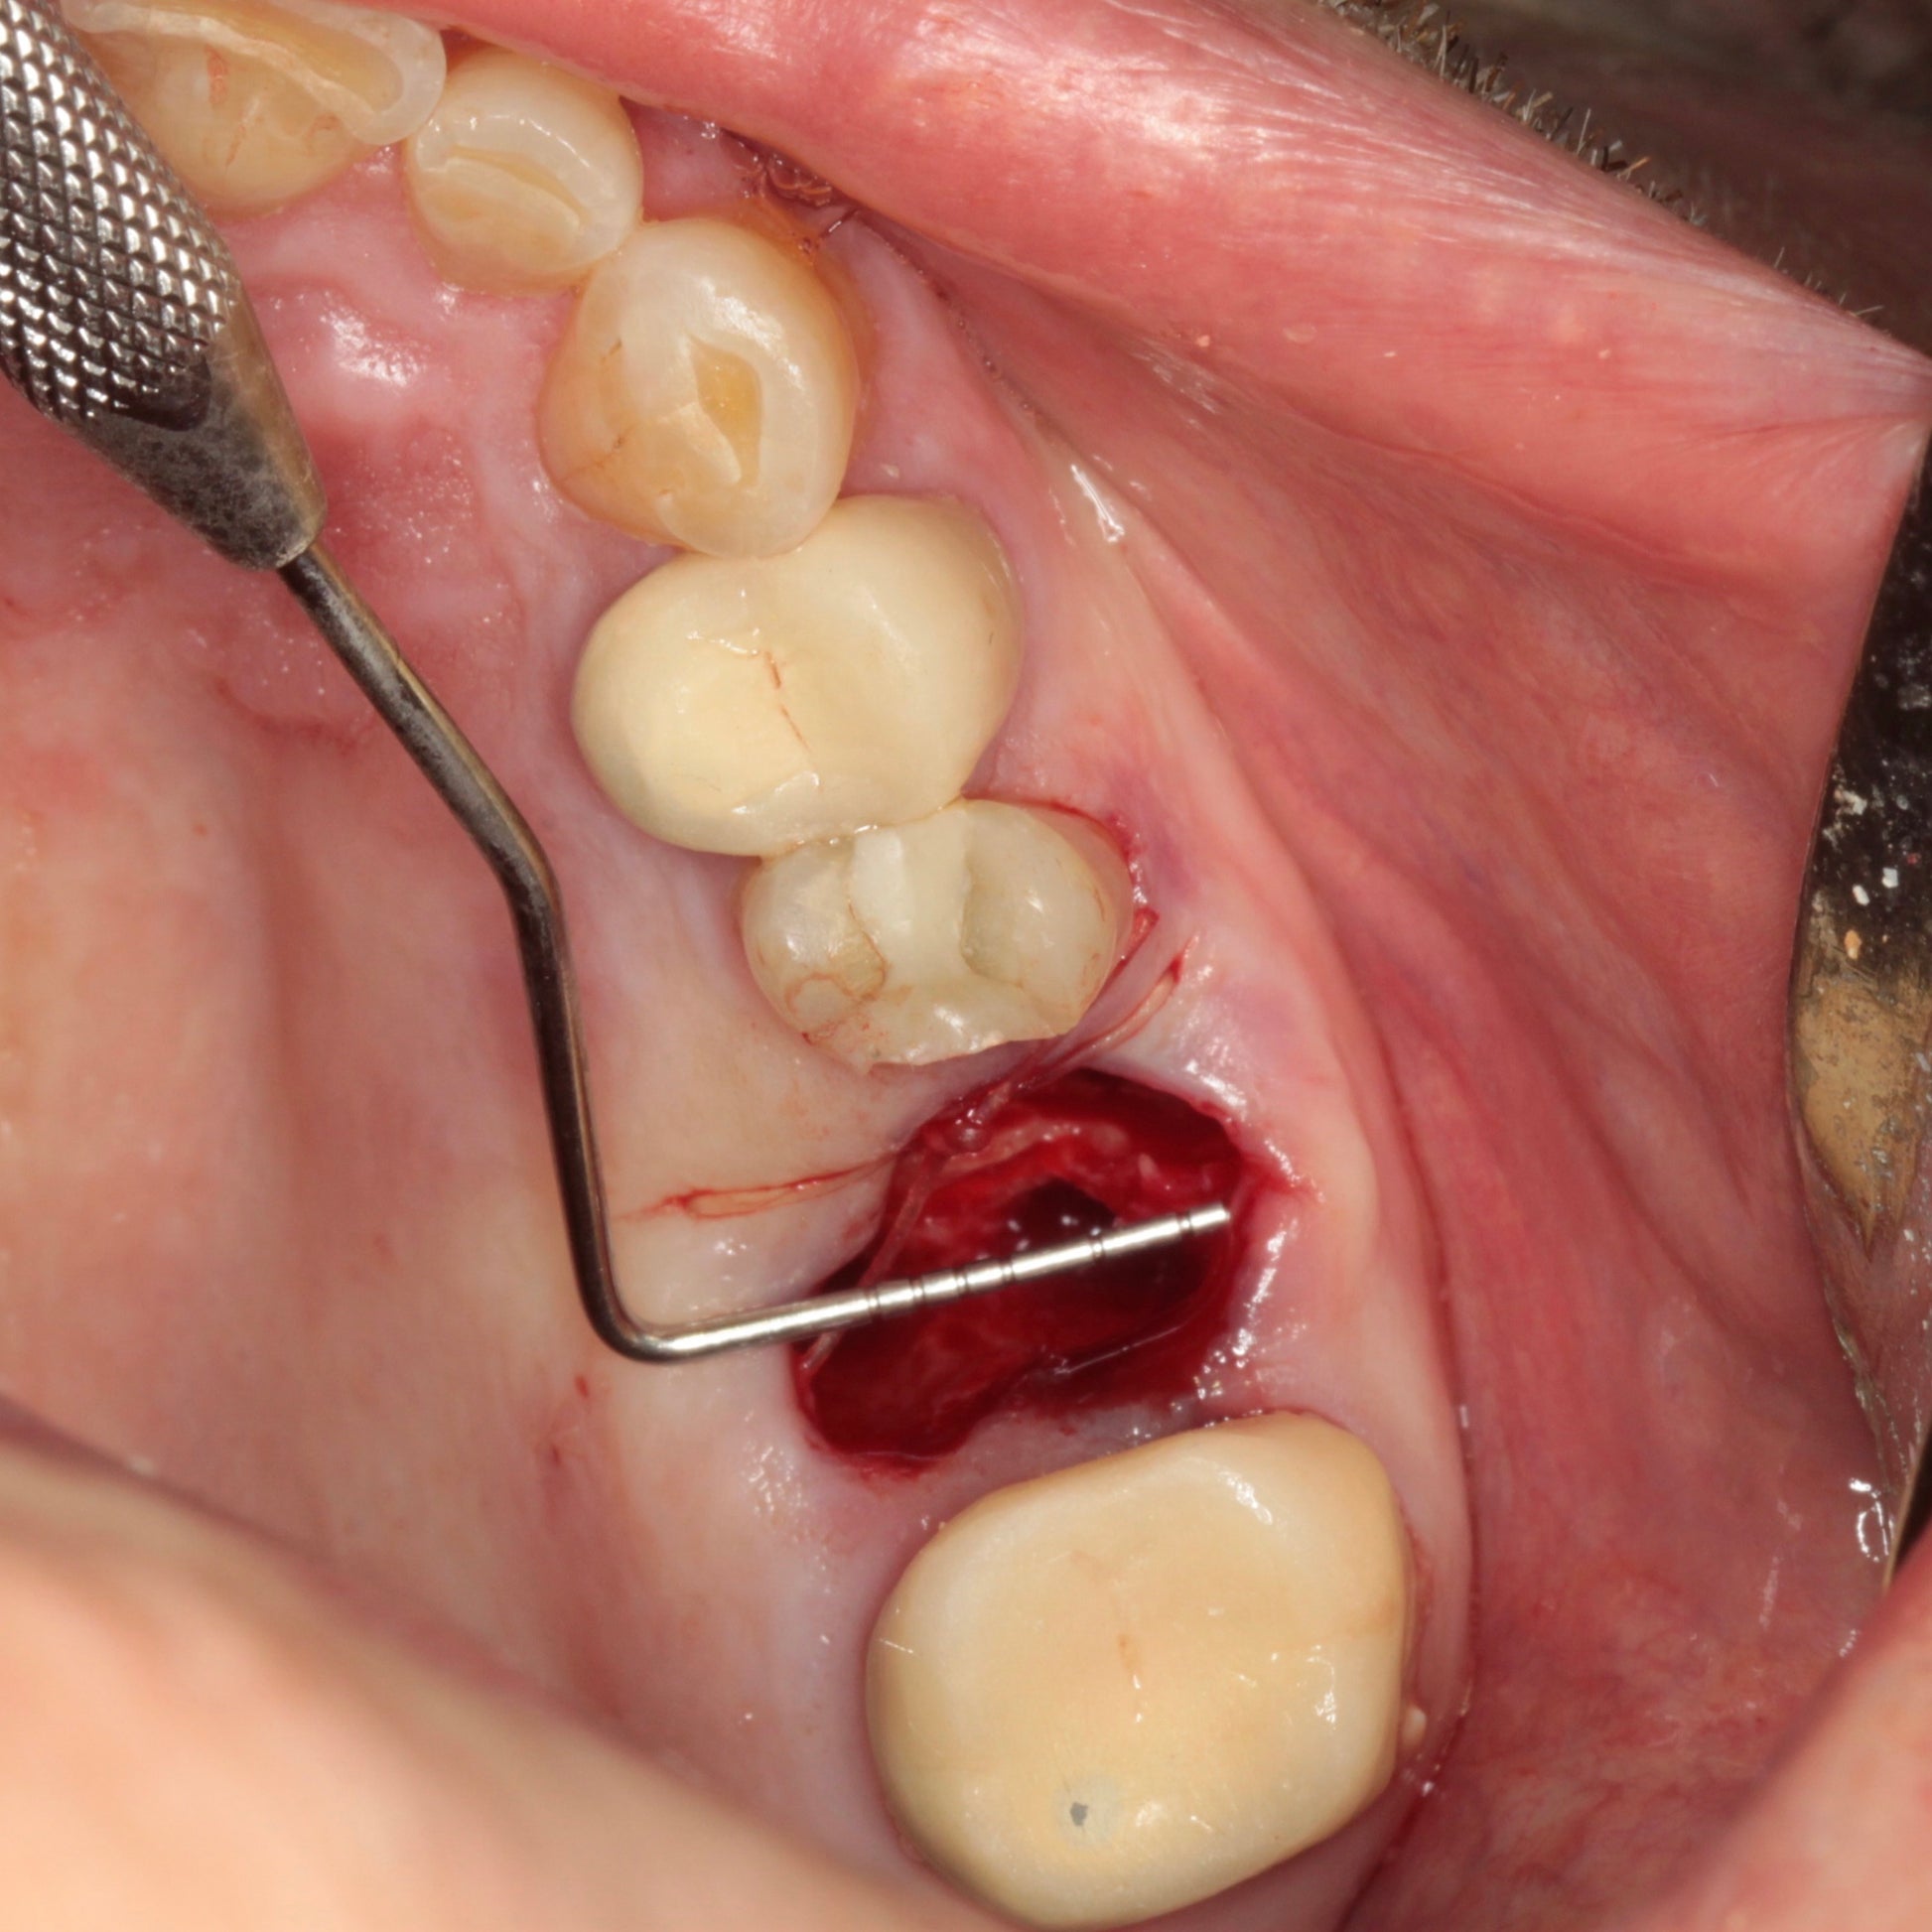  Occlusal view of upper jaw with a fresh extraction site and a periodontal probe